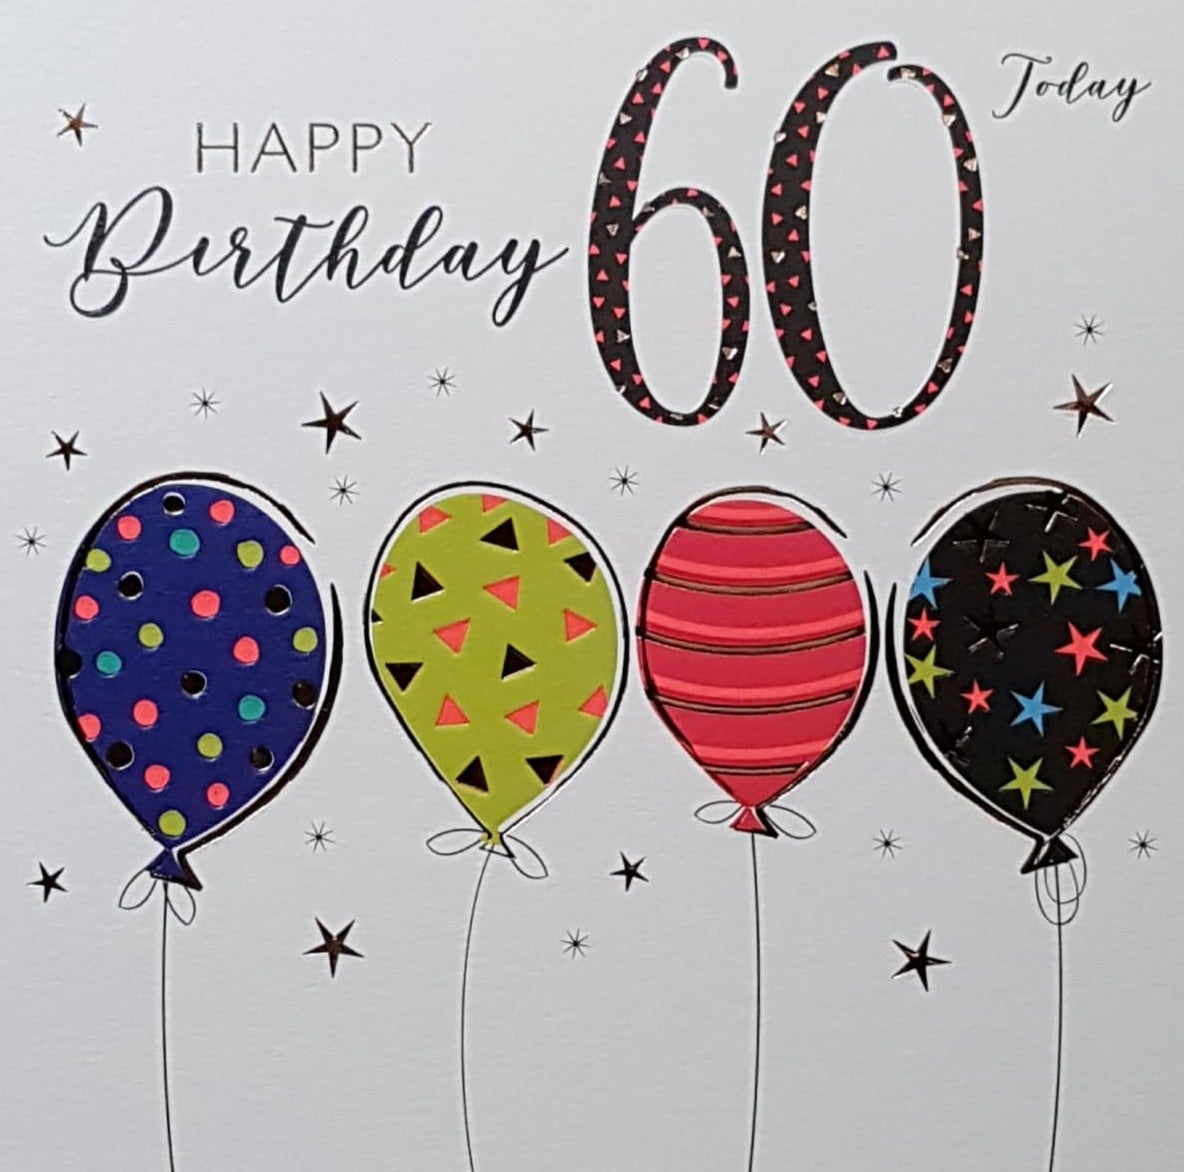 Age 60 Birthday Card - A Row Of Different Coloured Balloons With Patterns